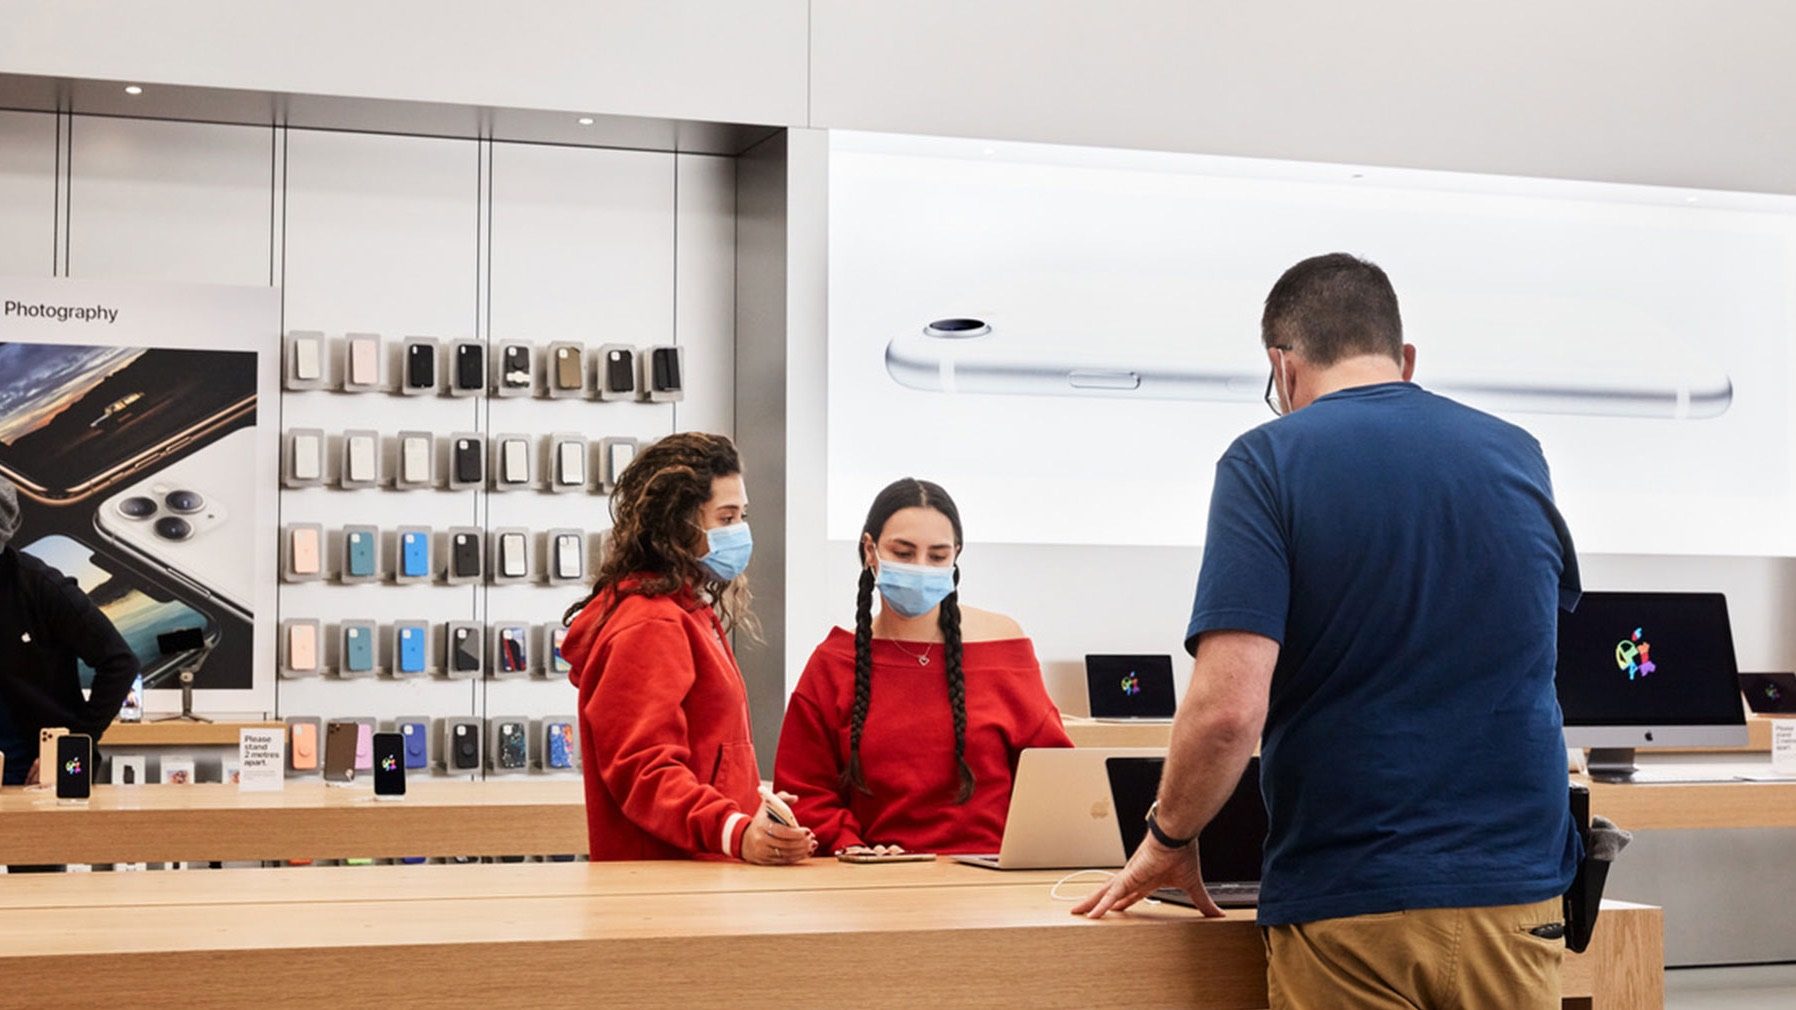 Apple details its approach to safety in retail stores, plans to reopen more than 25 US locations next week